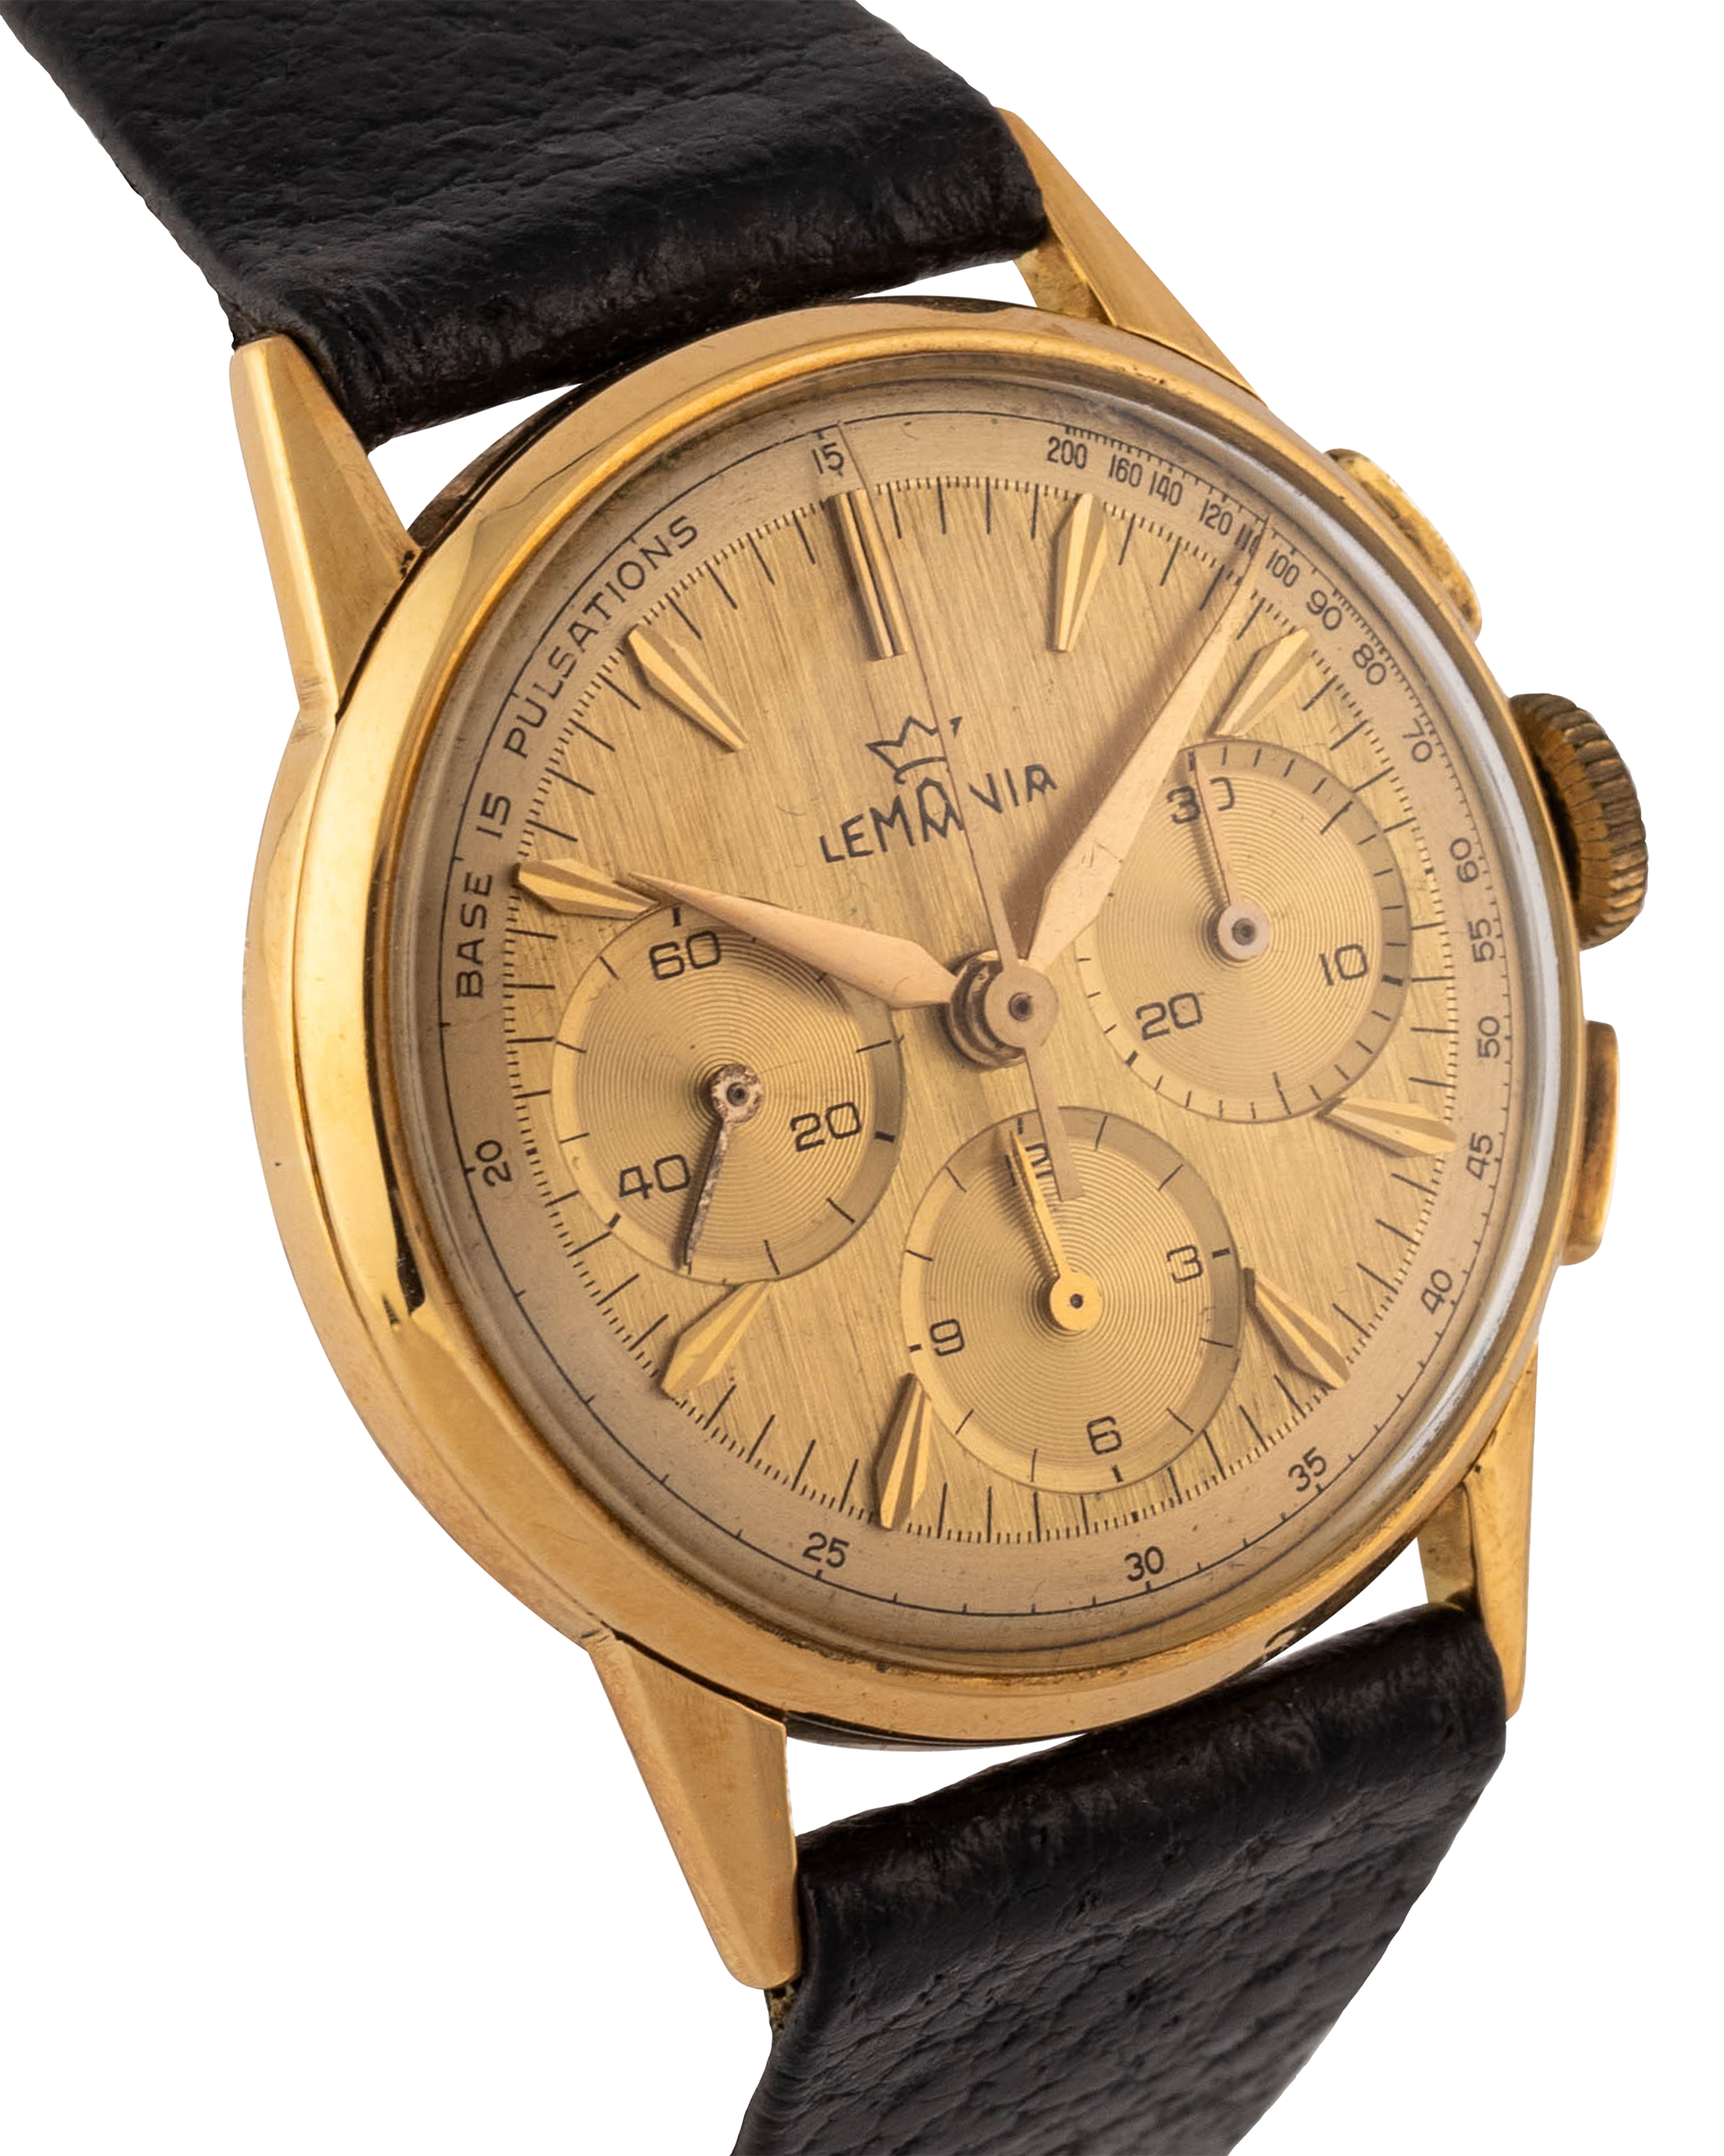 Lemania Chronograph "Champagne dial" wrist watch, in 18kt yellow gold 